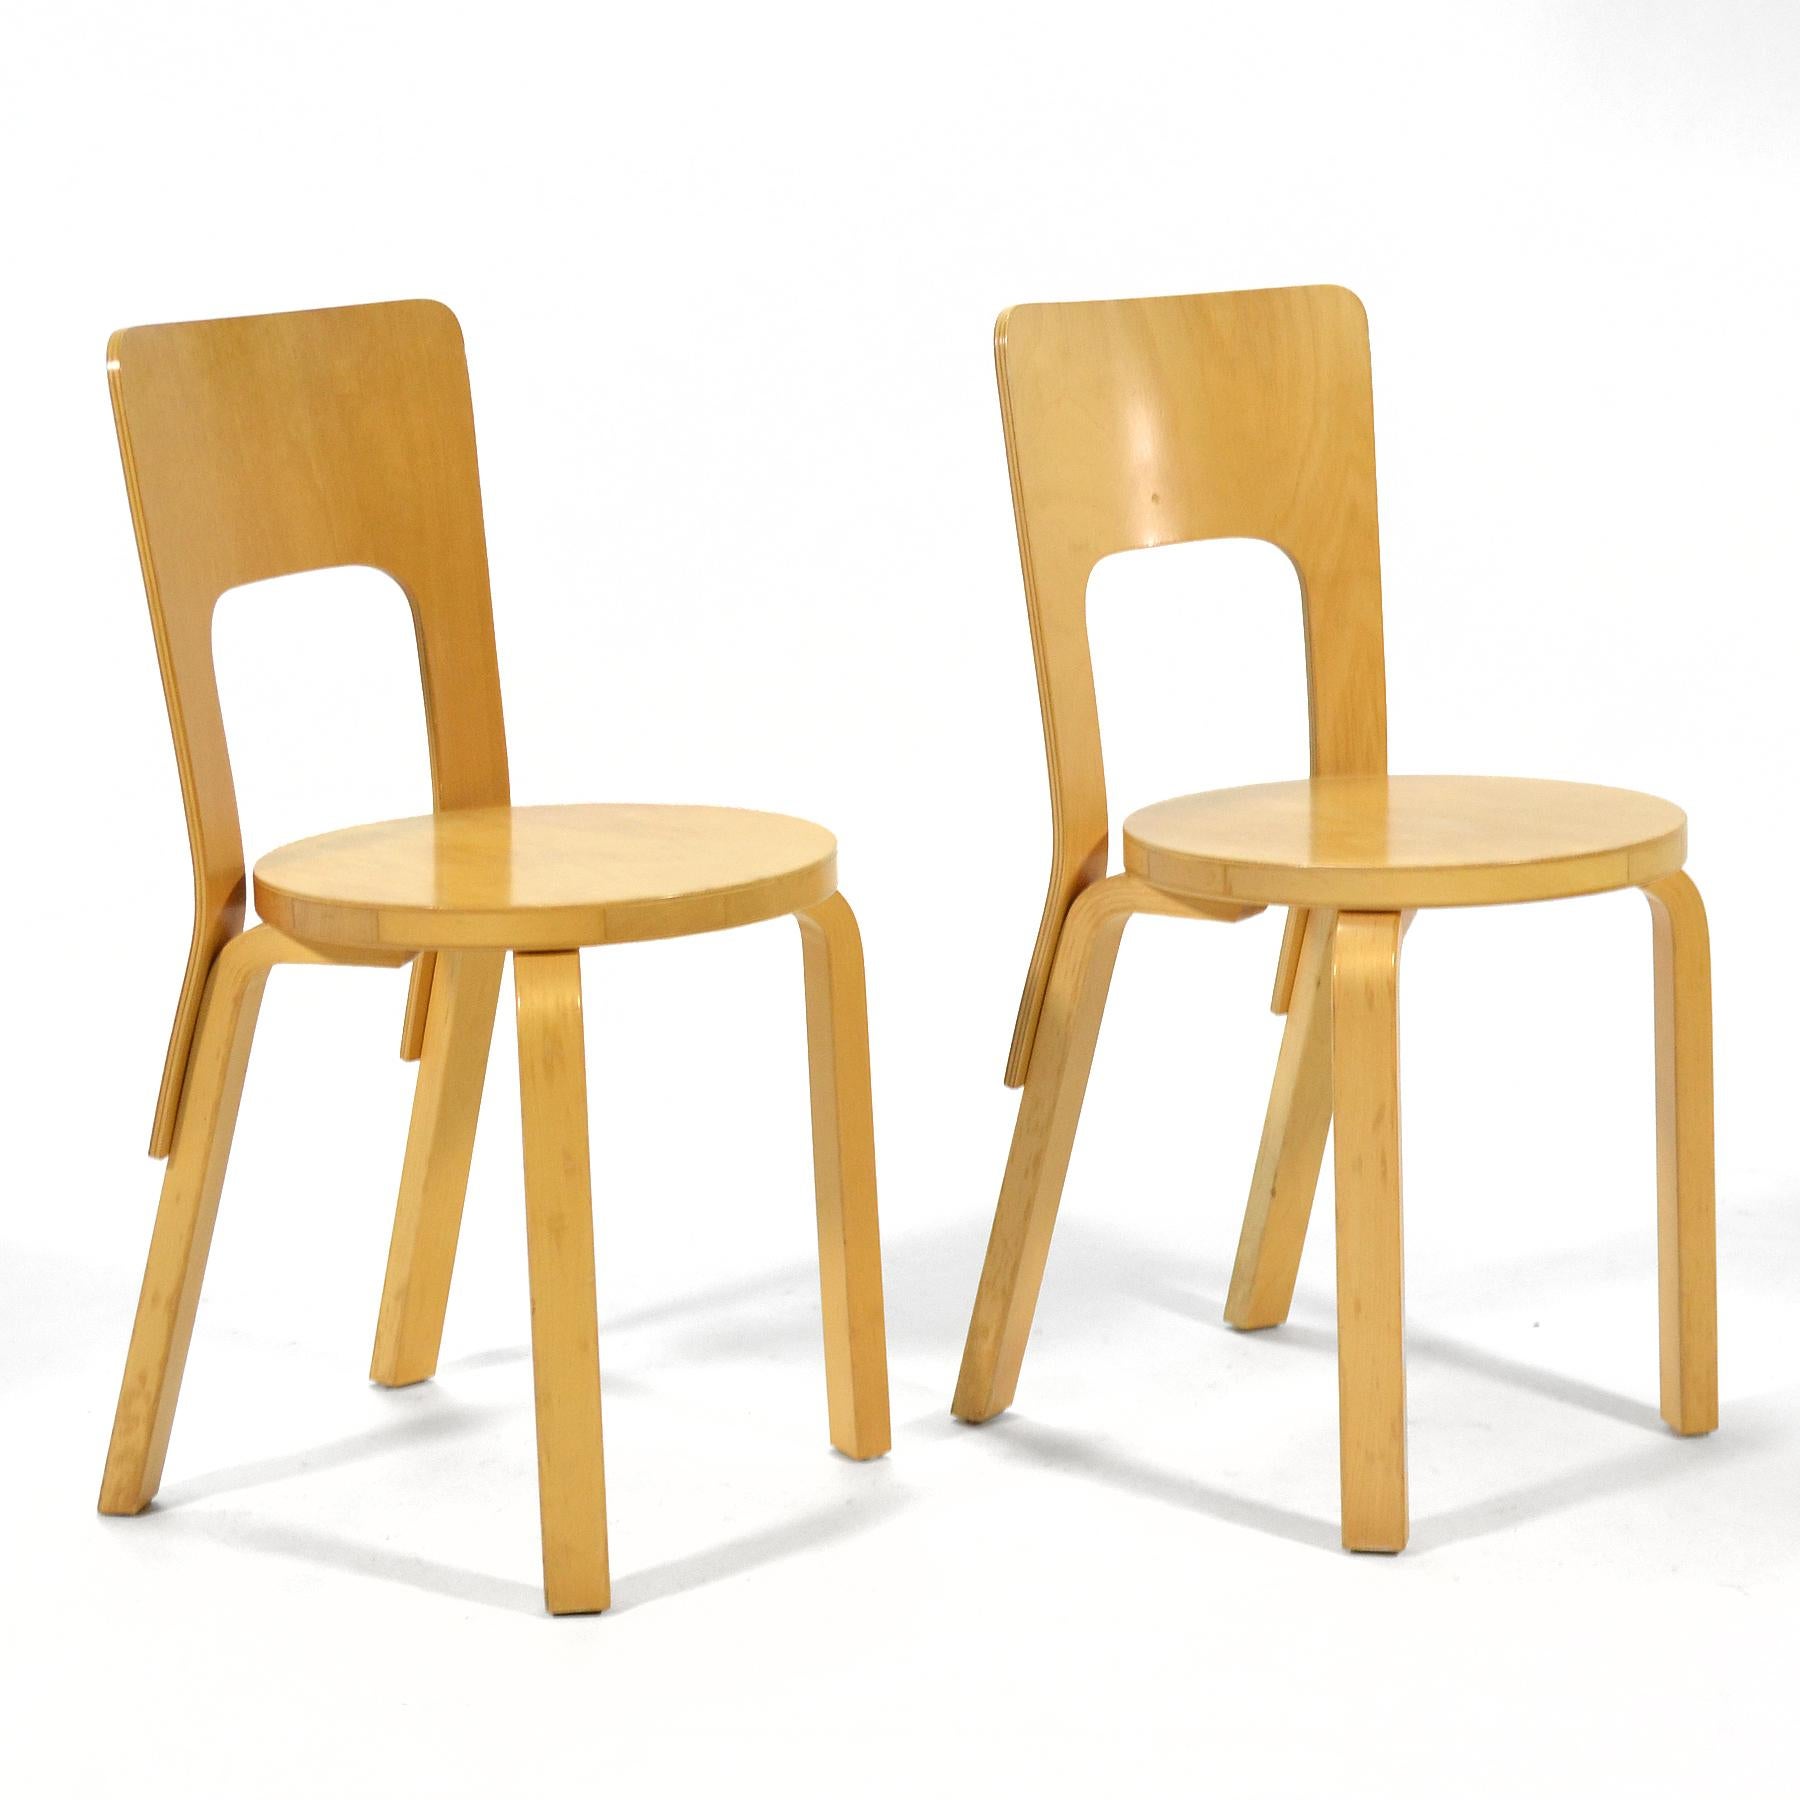 A lovely pair of Alver Aalto's model 66 chair. Produced by Artek, distributed by ICF.